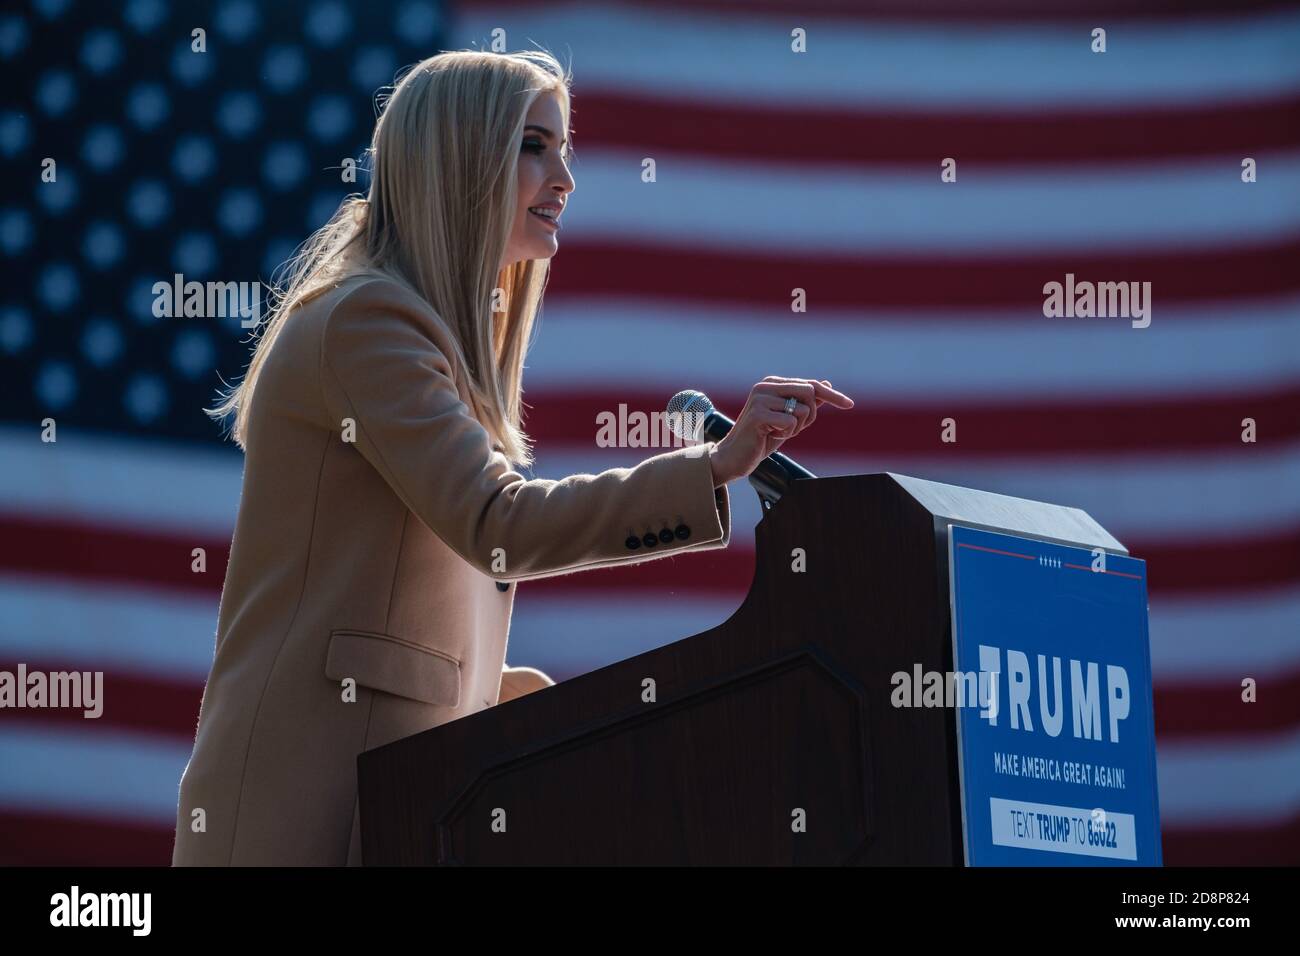 Canfield, Ohio, USA. 31st Oct, 2020. IVANKA TRUMP delivers remarks during a Make America Great Again event with Ohio Senator Rob Portman, outside the Mahoning County Career and Technical Center in Canfield. Credit: Andrew Dolph/ZUMA Wire/Alamy Live News Stock Photo